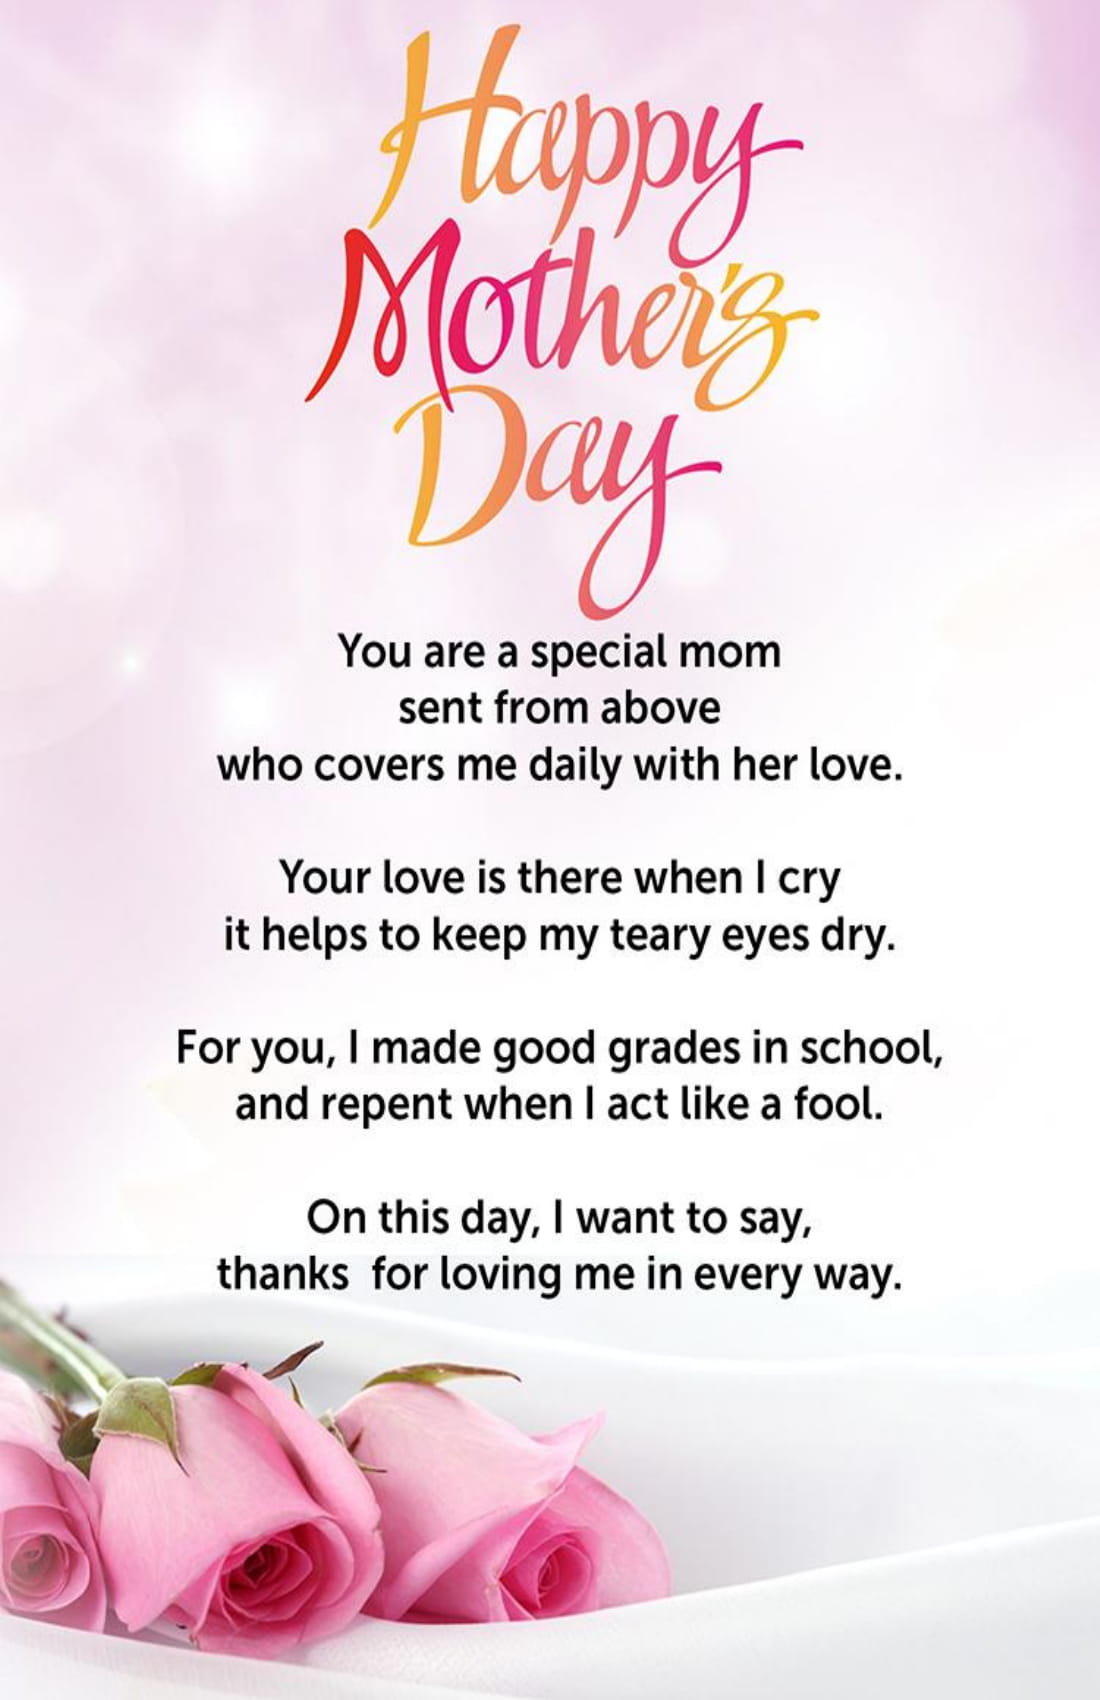 two-printable-happy-mother-s-day-cards-blank-inside-5-5-x-8-5-and-3